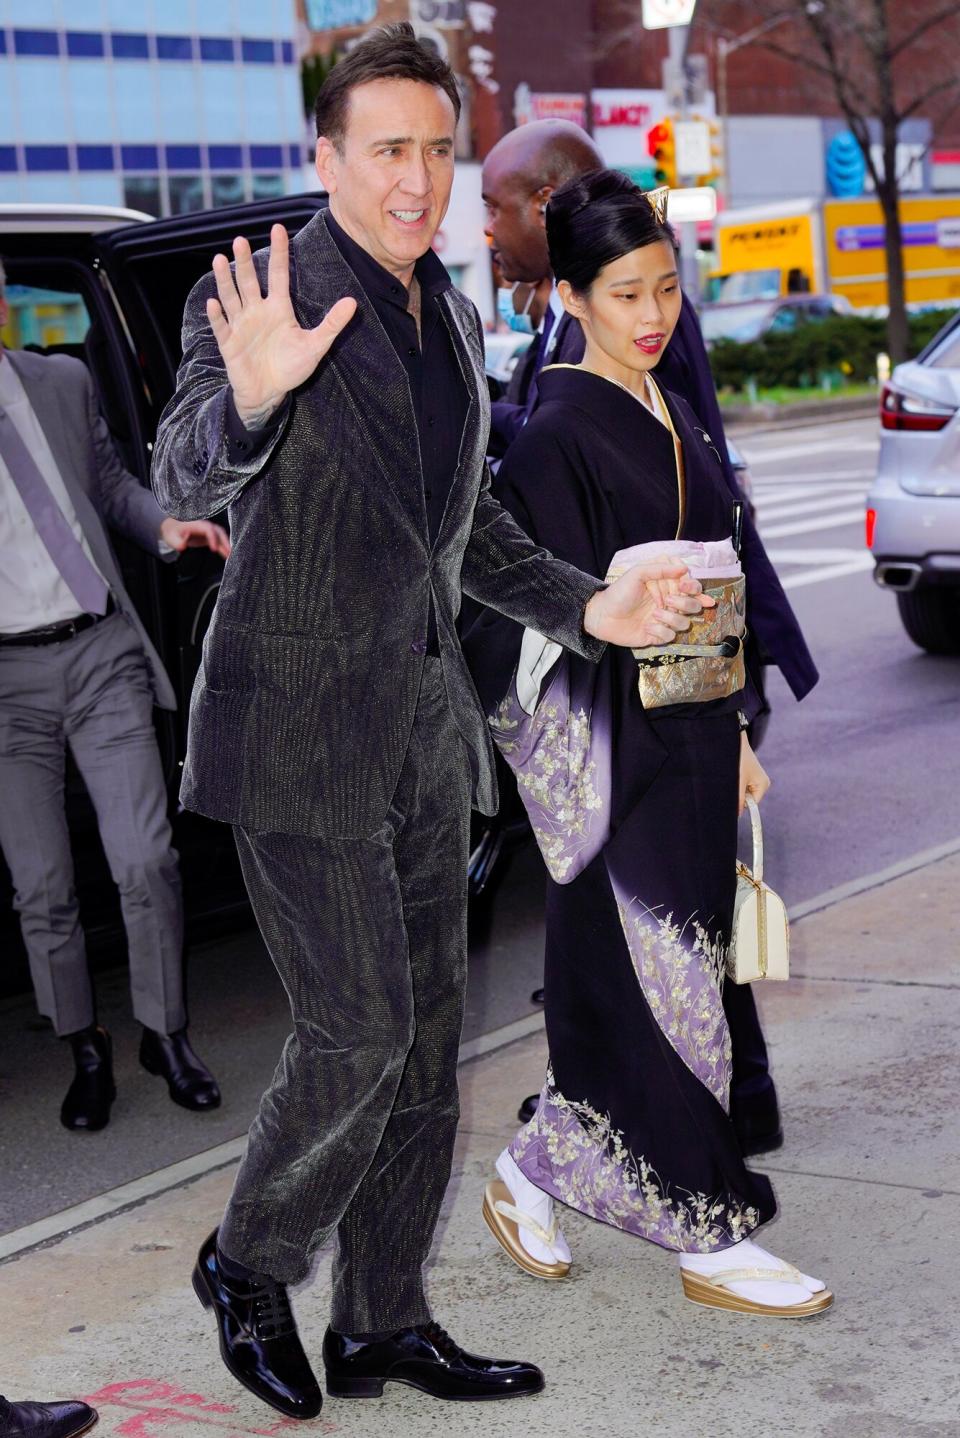 Nicolas Cage and Riko Shibata at the premiere of 'The Unbearable Weight of Massive Talent' on April 10, 2022 in New York City